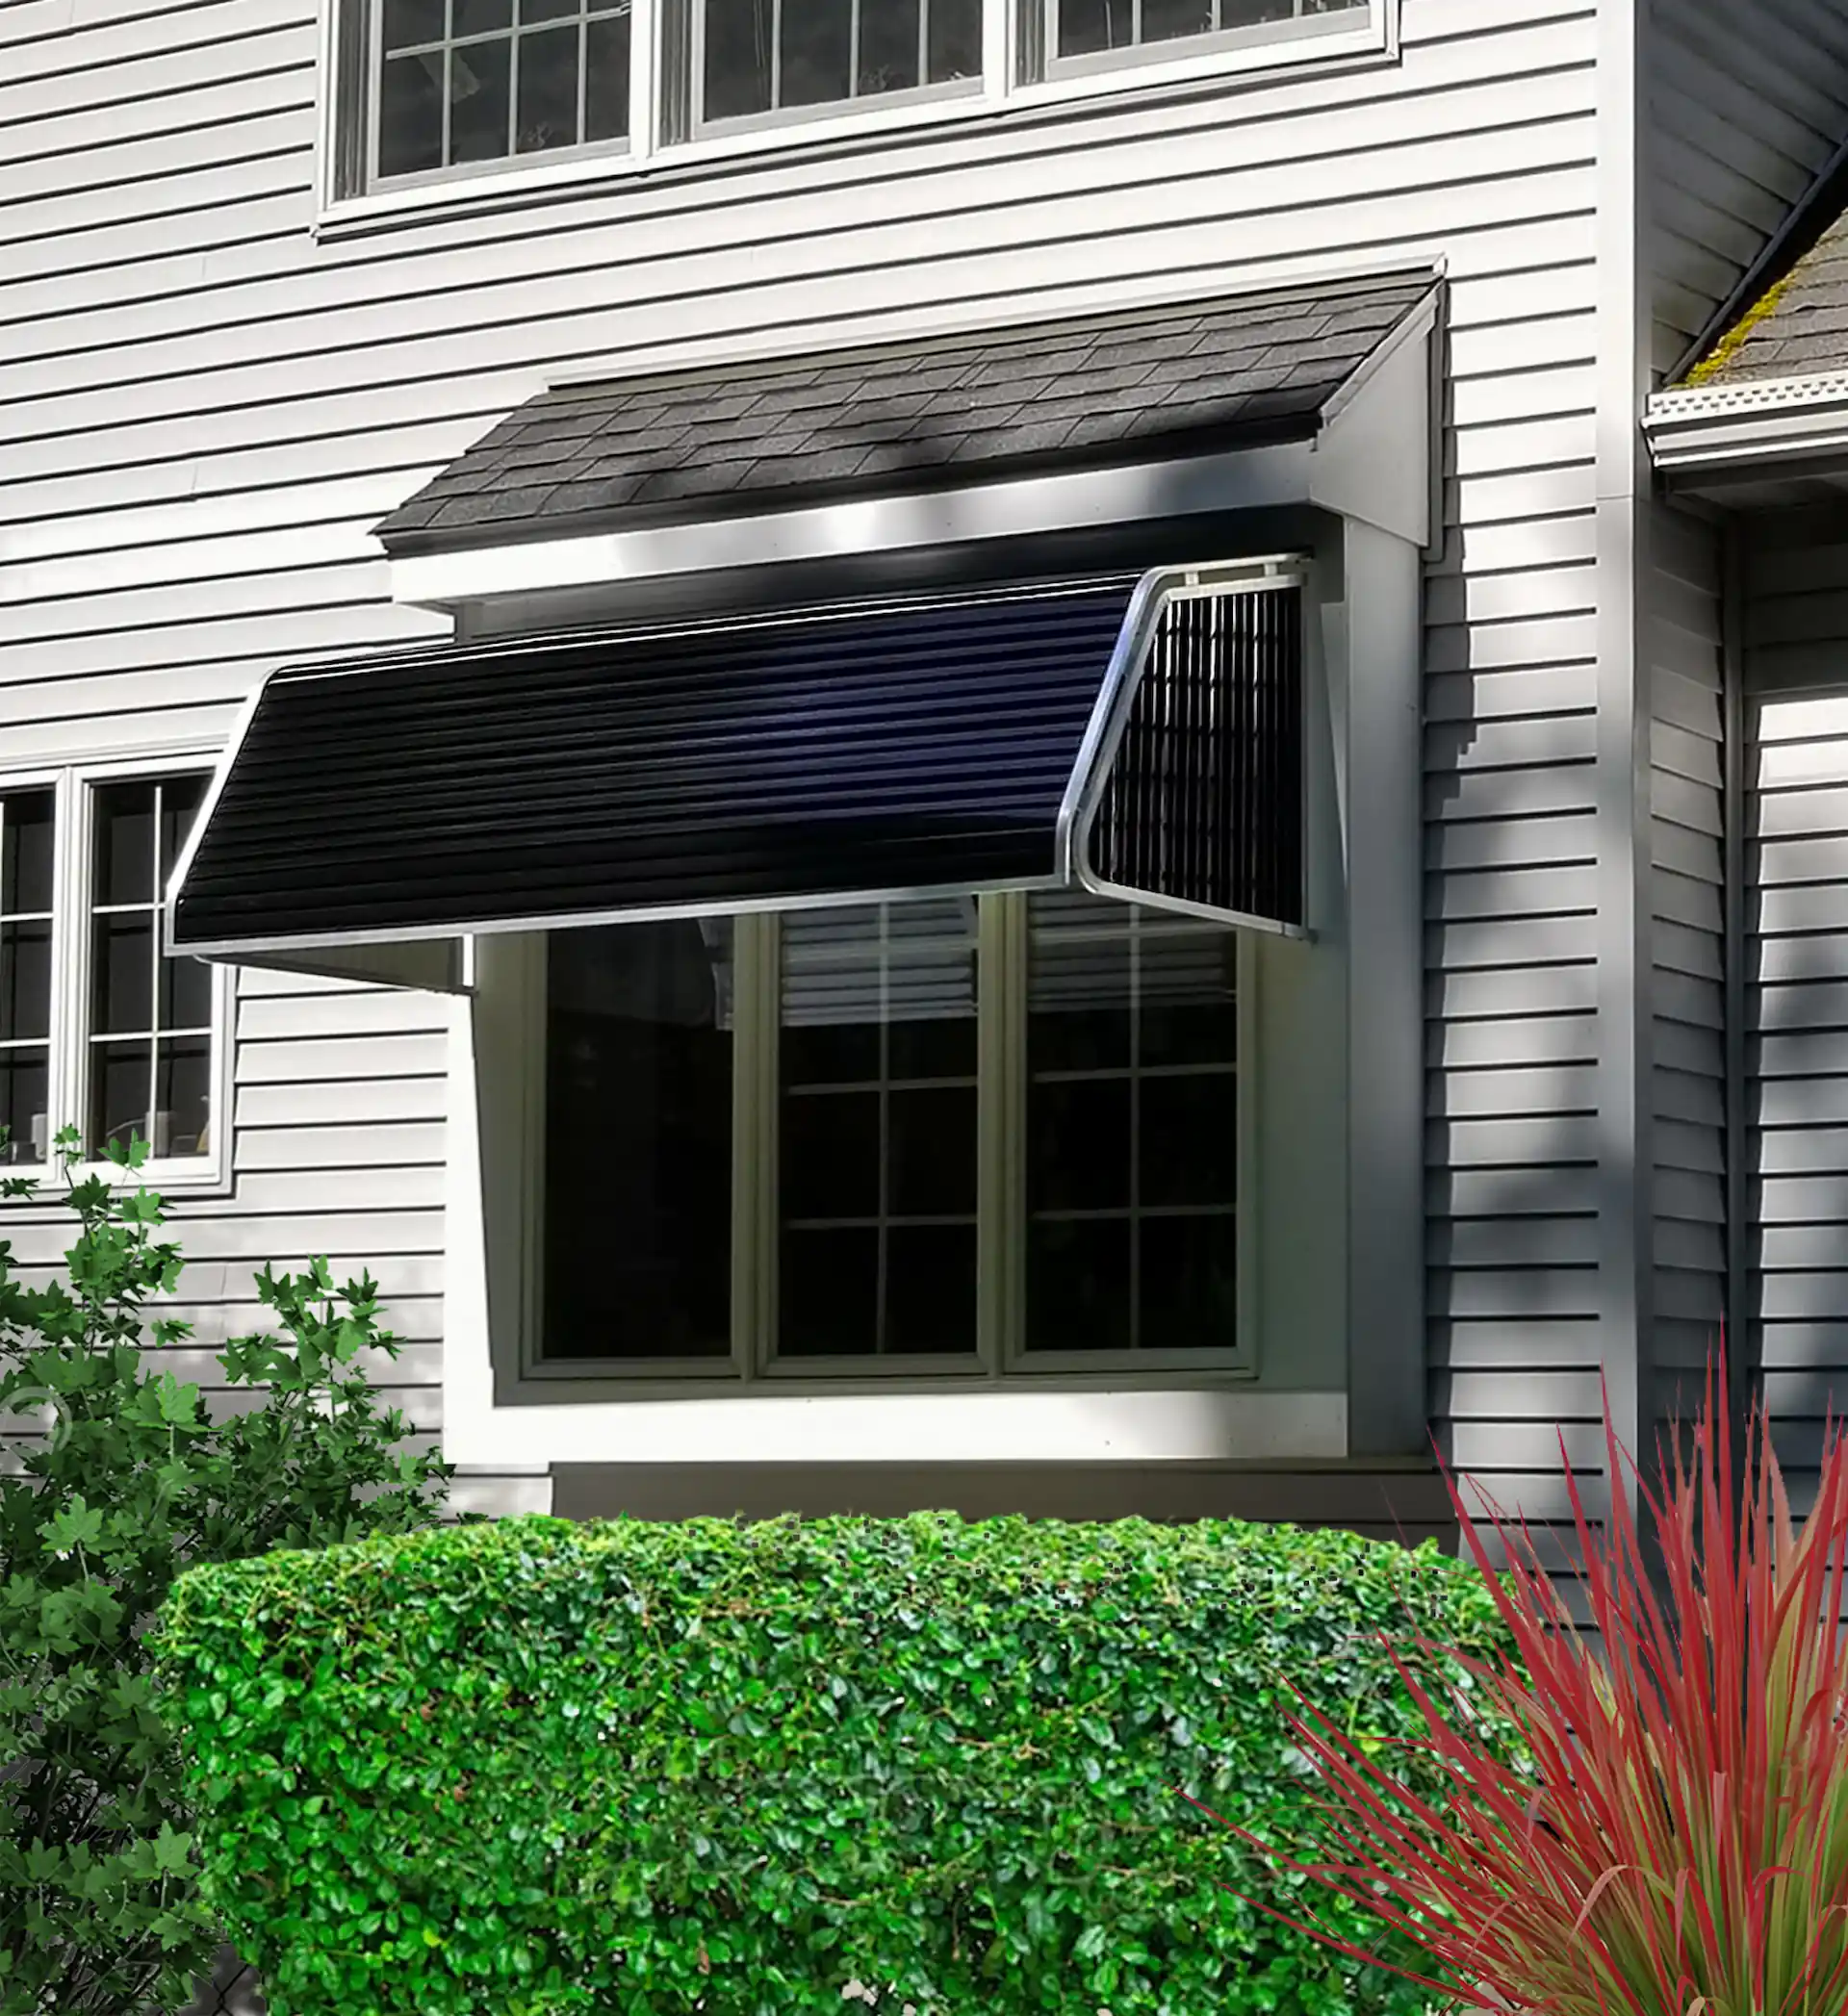 Medium shot of a black fixed awning on the side of a white house. Window awnings like this require specialized installation knowledge when deciding to move them from one home to another.